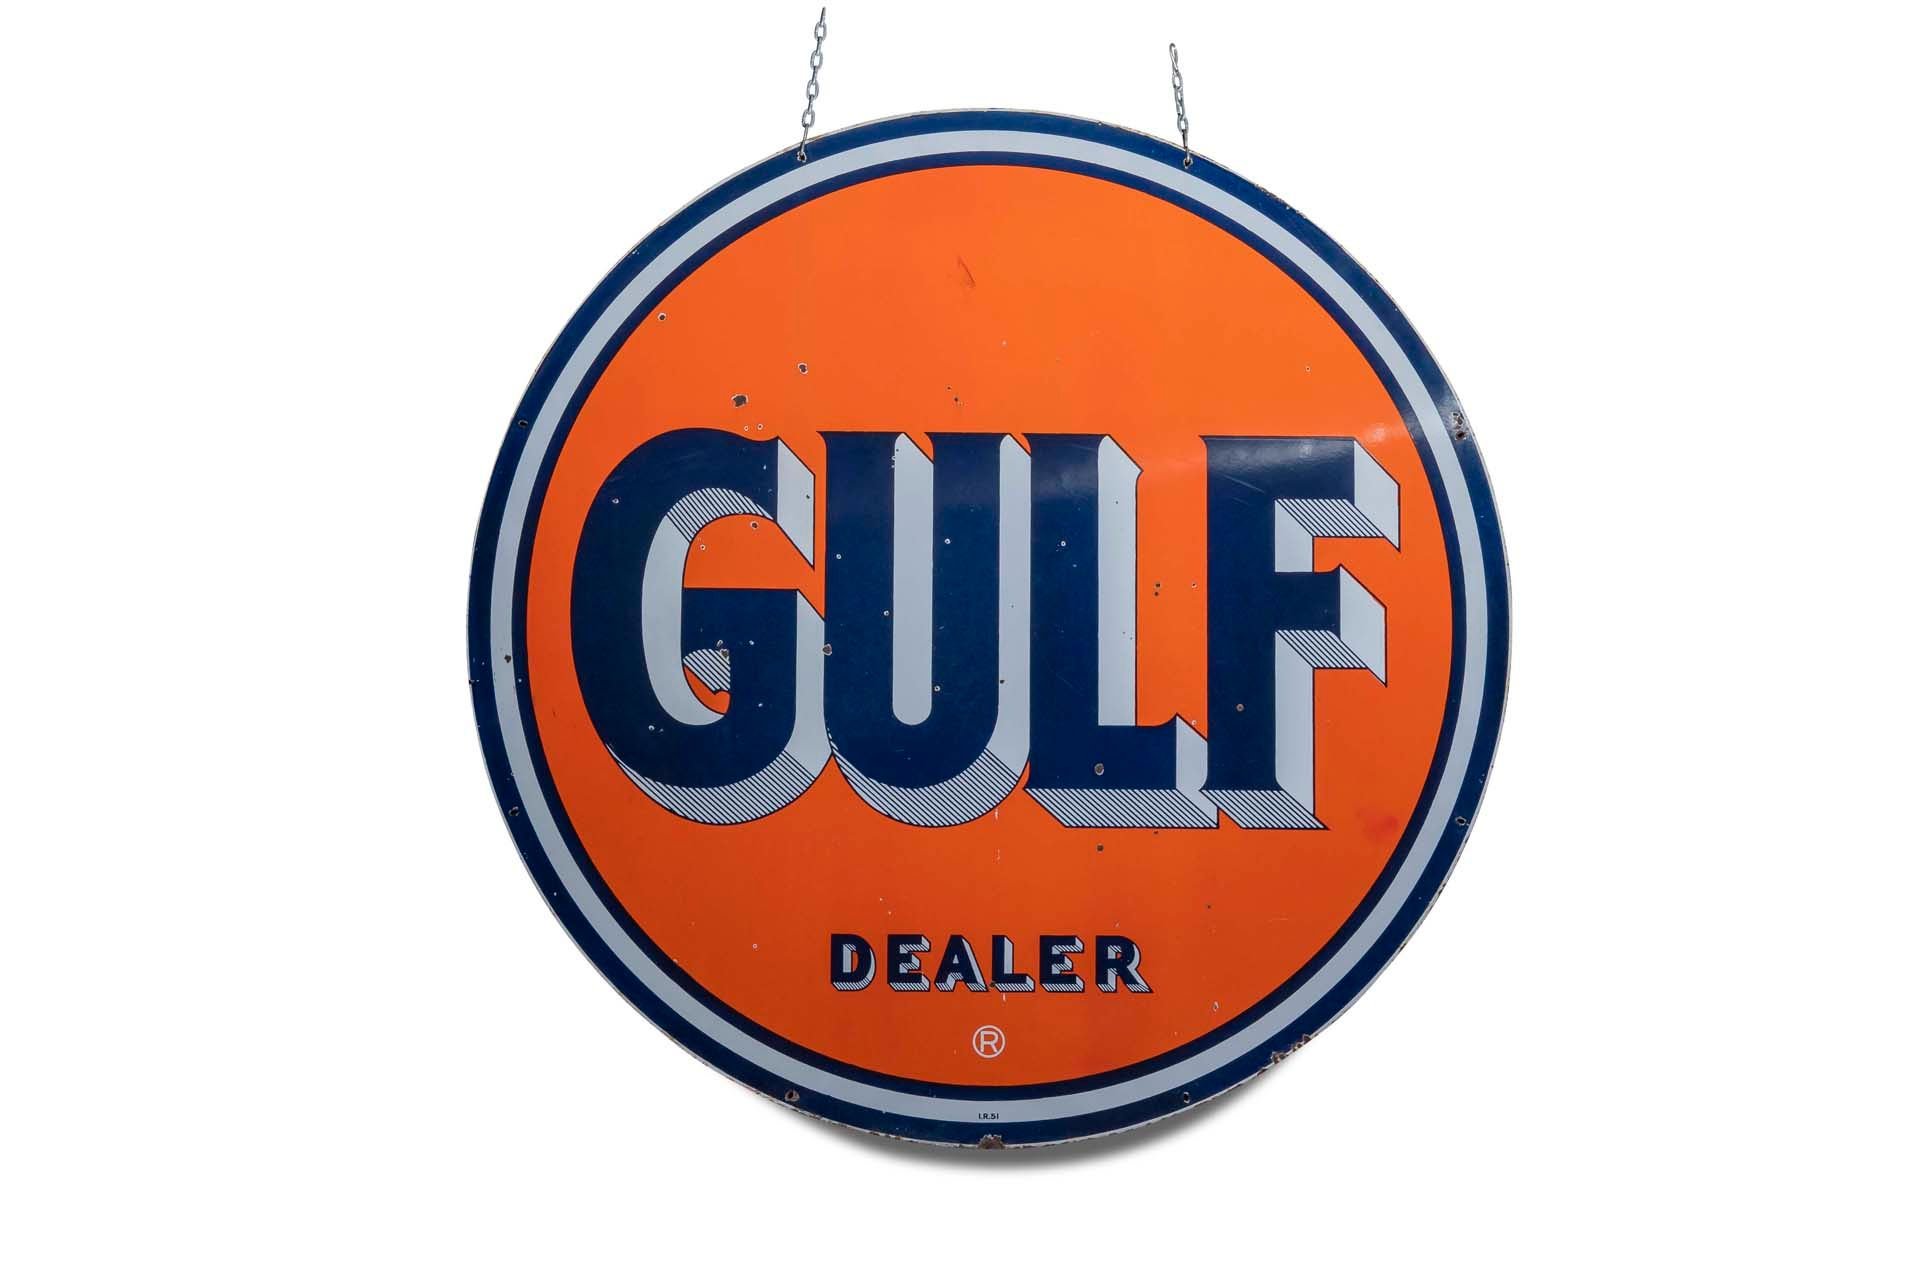 For Sale 'Gulf' Porcelain Sign, Double-Sided